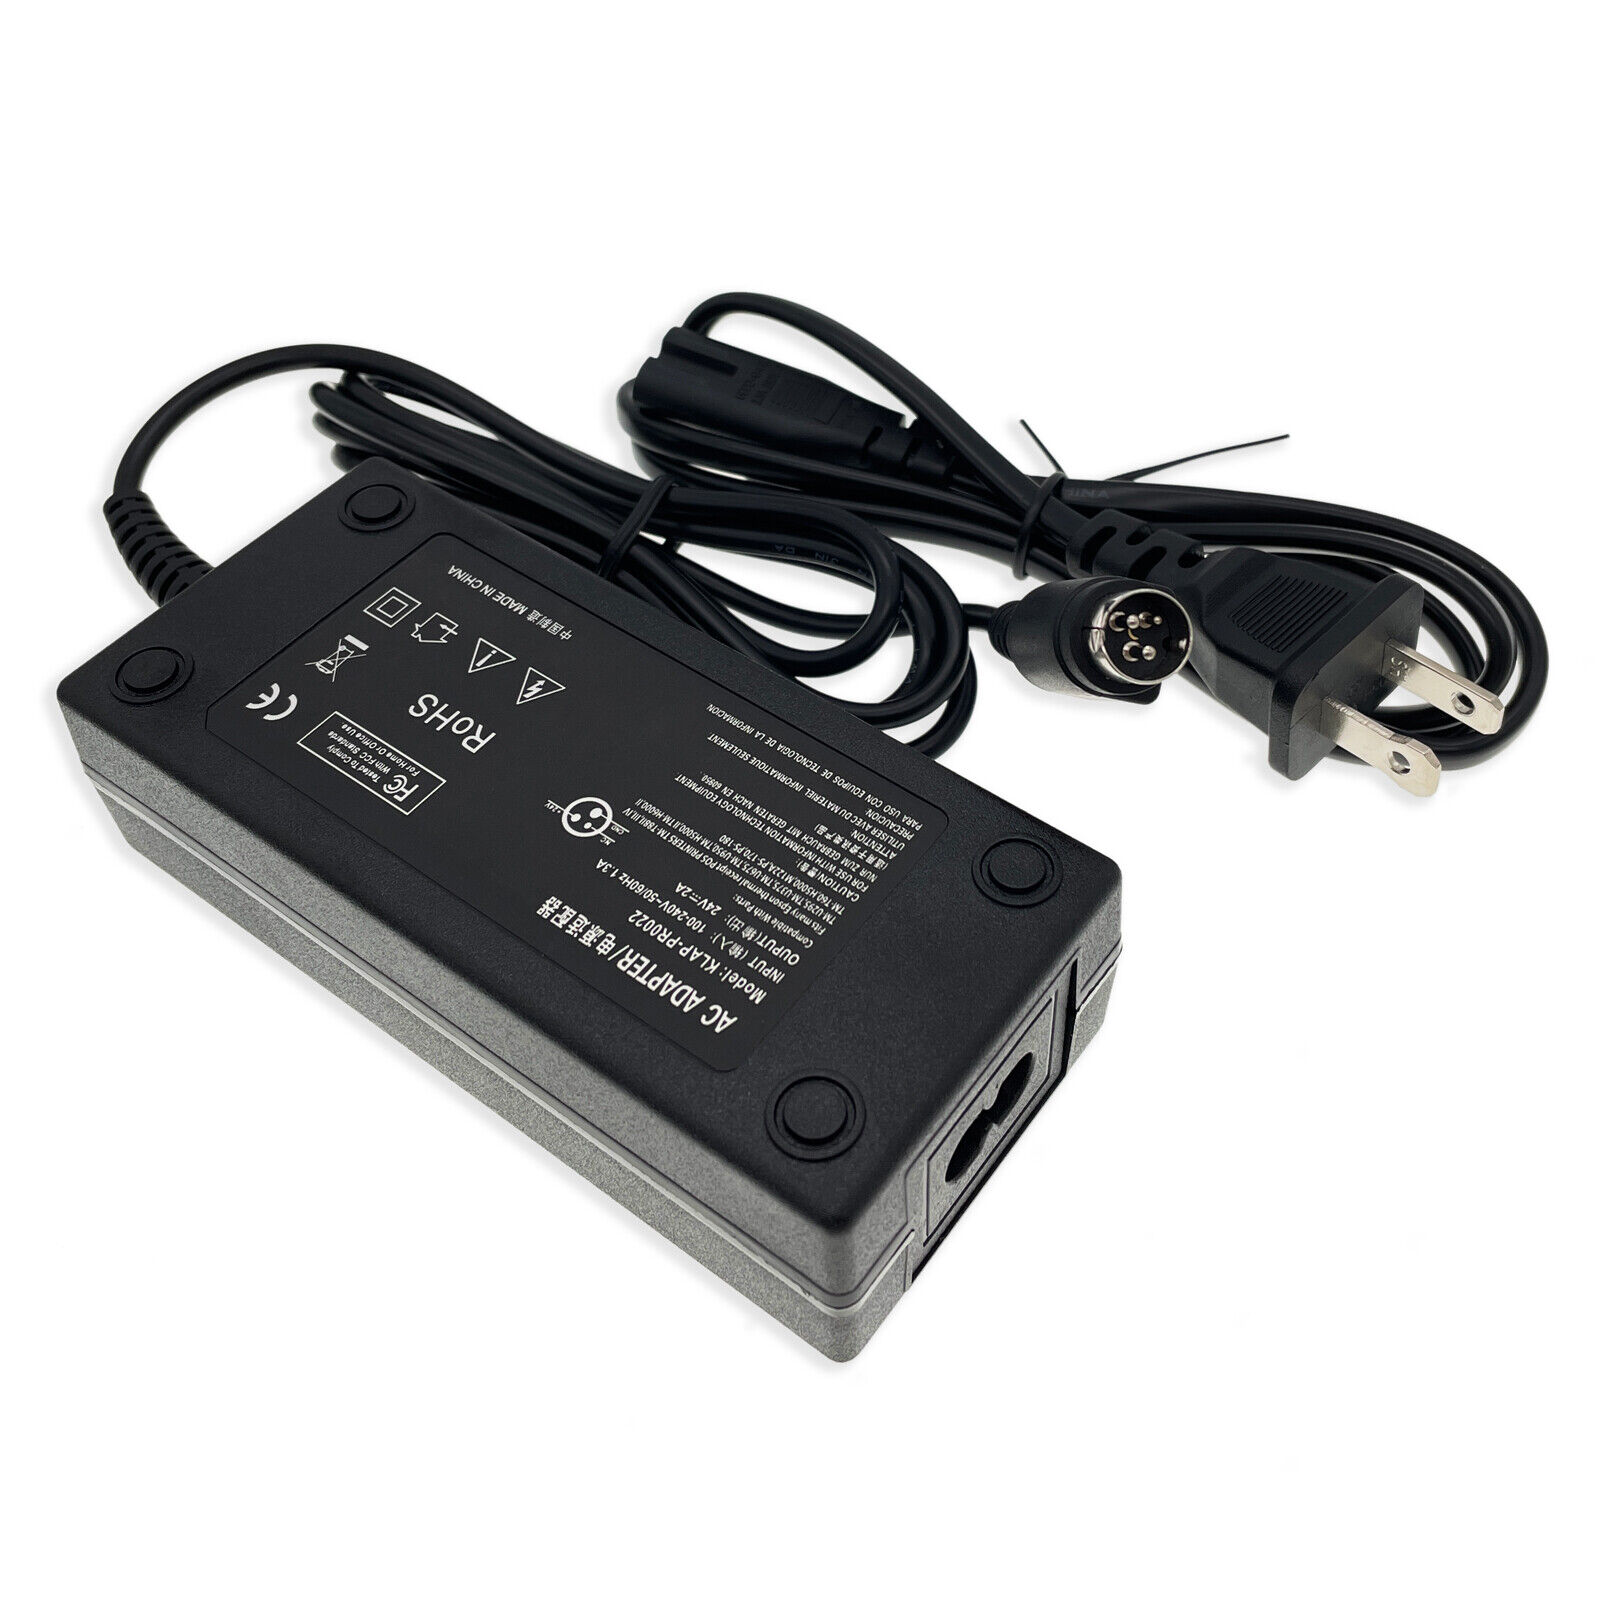 AC Adapter For Epson TM88 M122 M147A M147B M147C Printer DC Power Supply Charger Brand Unbranded/Generic Compatible Bra